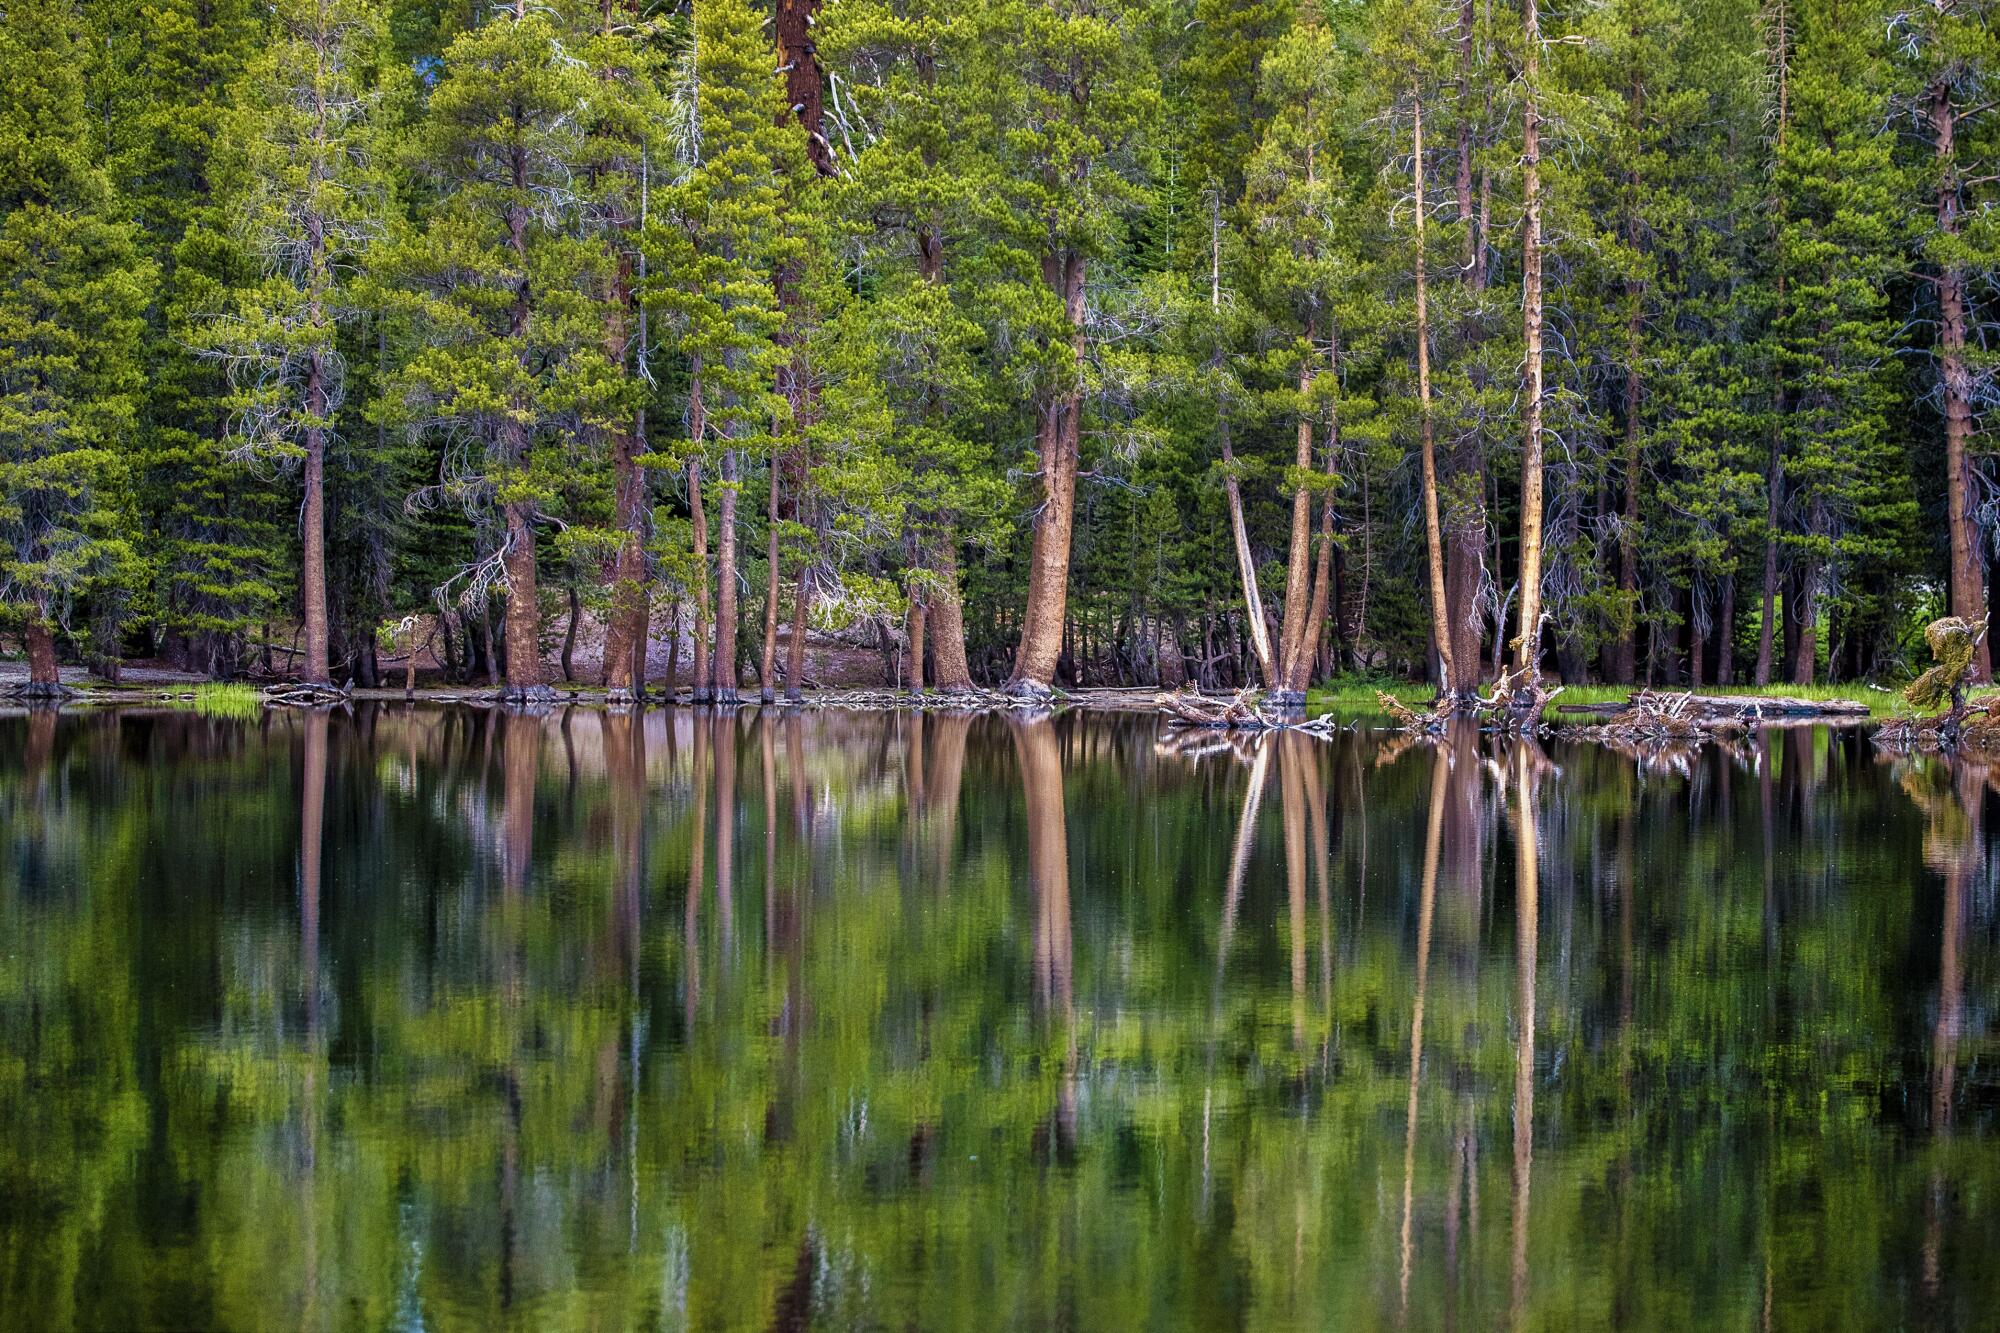 Trees are perfectly reflected in still water.
